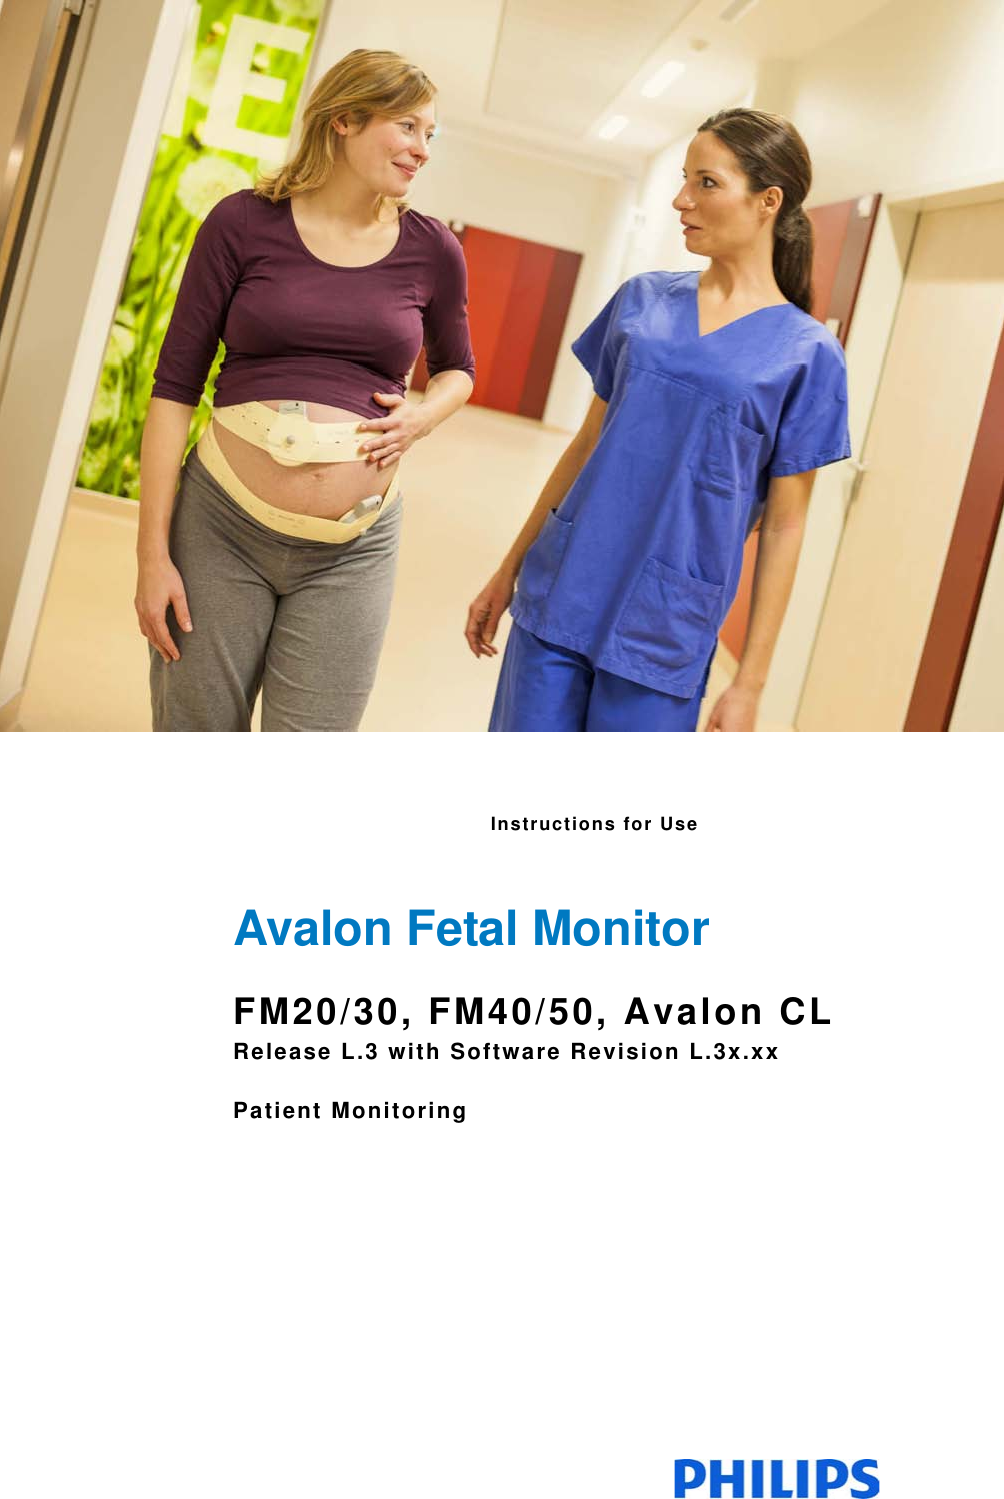 Instructions for Use Avalon Fetal MonitorFM20/30, FM40/50, Avalon CLRelease L.3 with Software Revision L.3x.xxPatient Monitoring